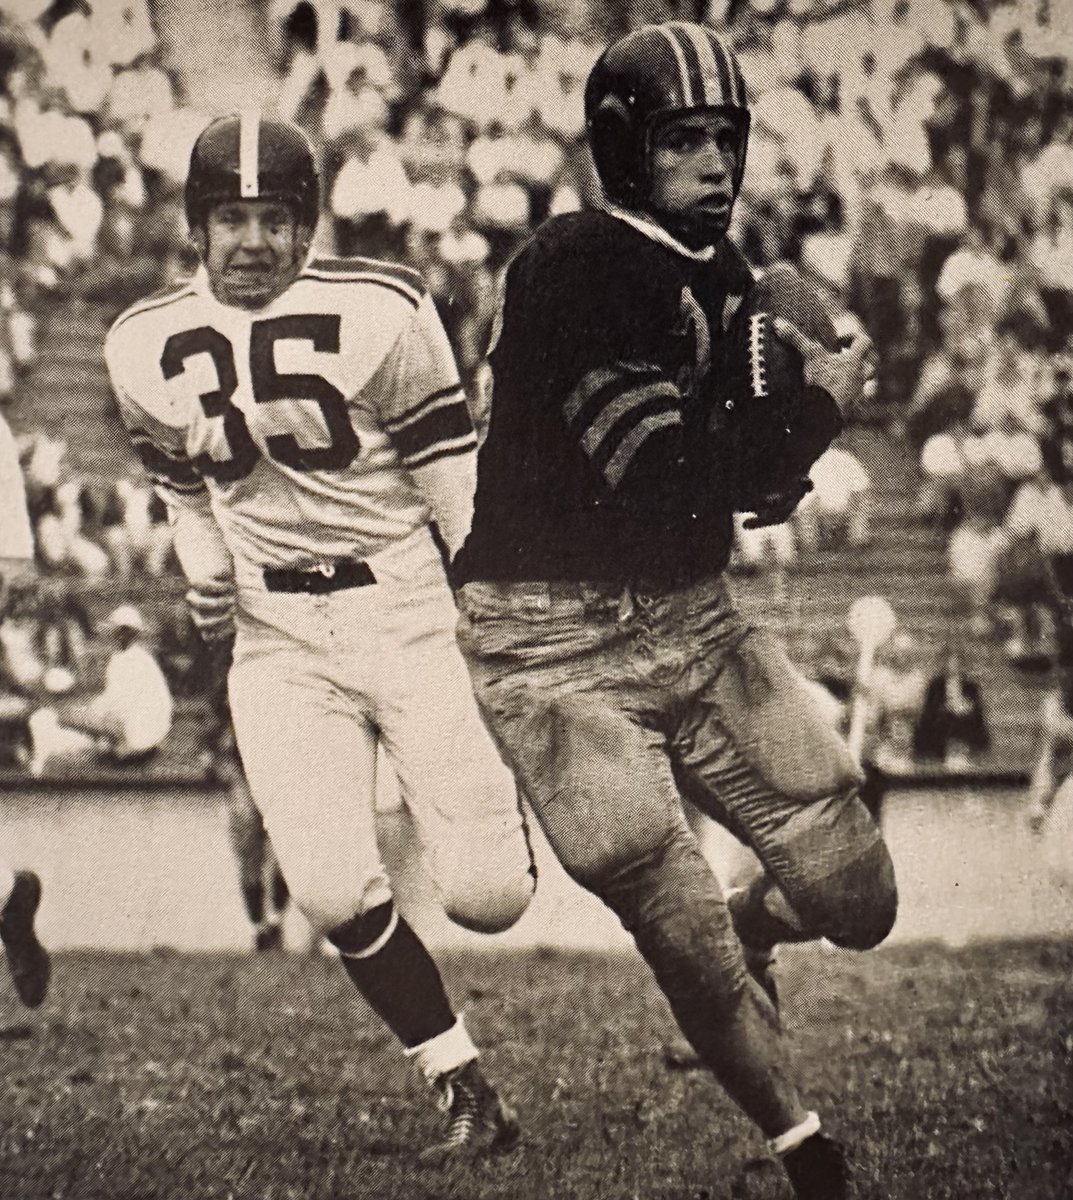 A tremendous athlete, Hal Norris played guard for two years before moving to halfback for the 1954 season. Hal was drafted by the Washington Redskins as a defensive back in the 16th round of the 1955 NFL Draft.

#38 days until Cal football. https://t.co/kdcGYdZnww